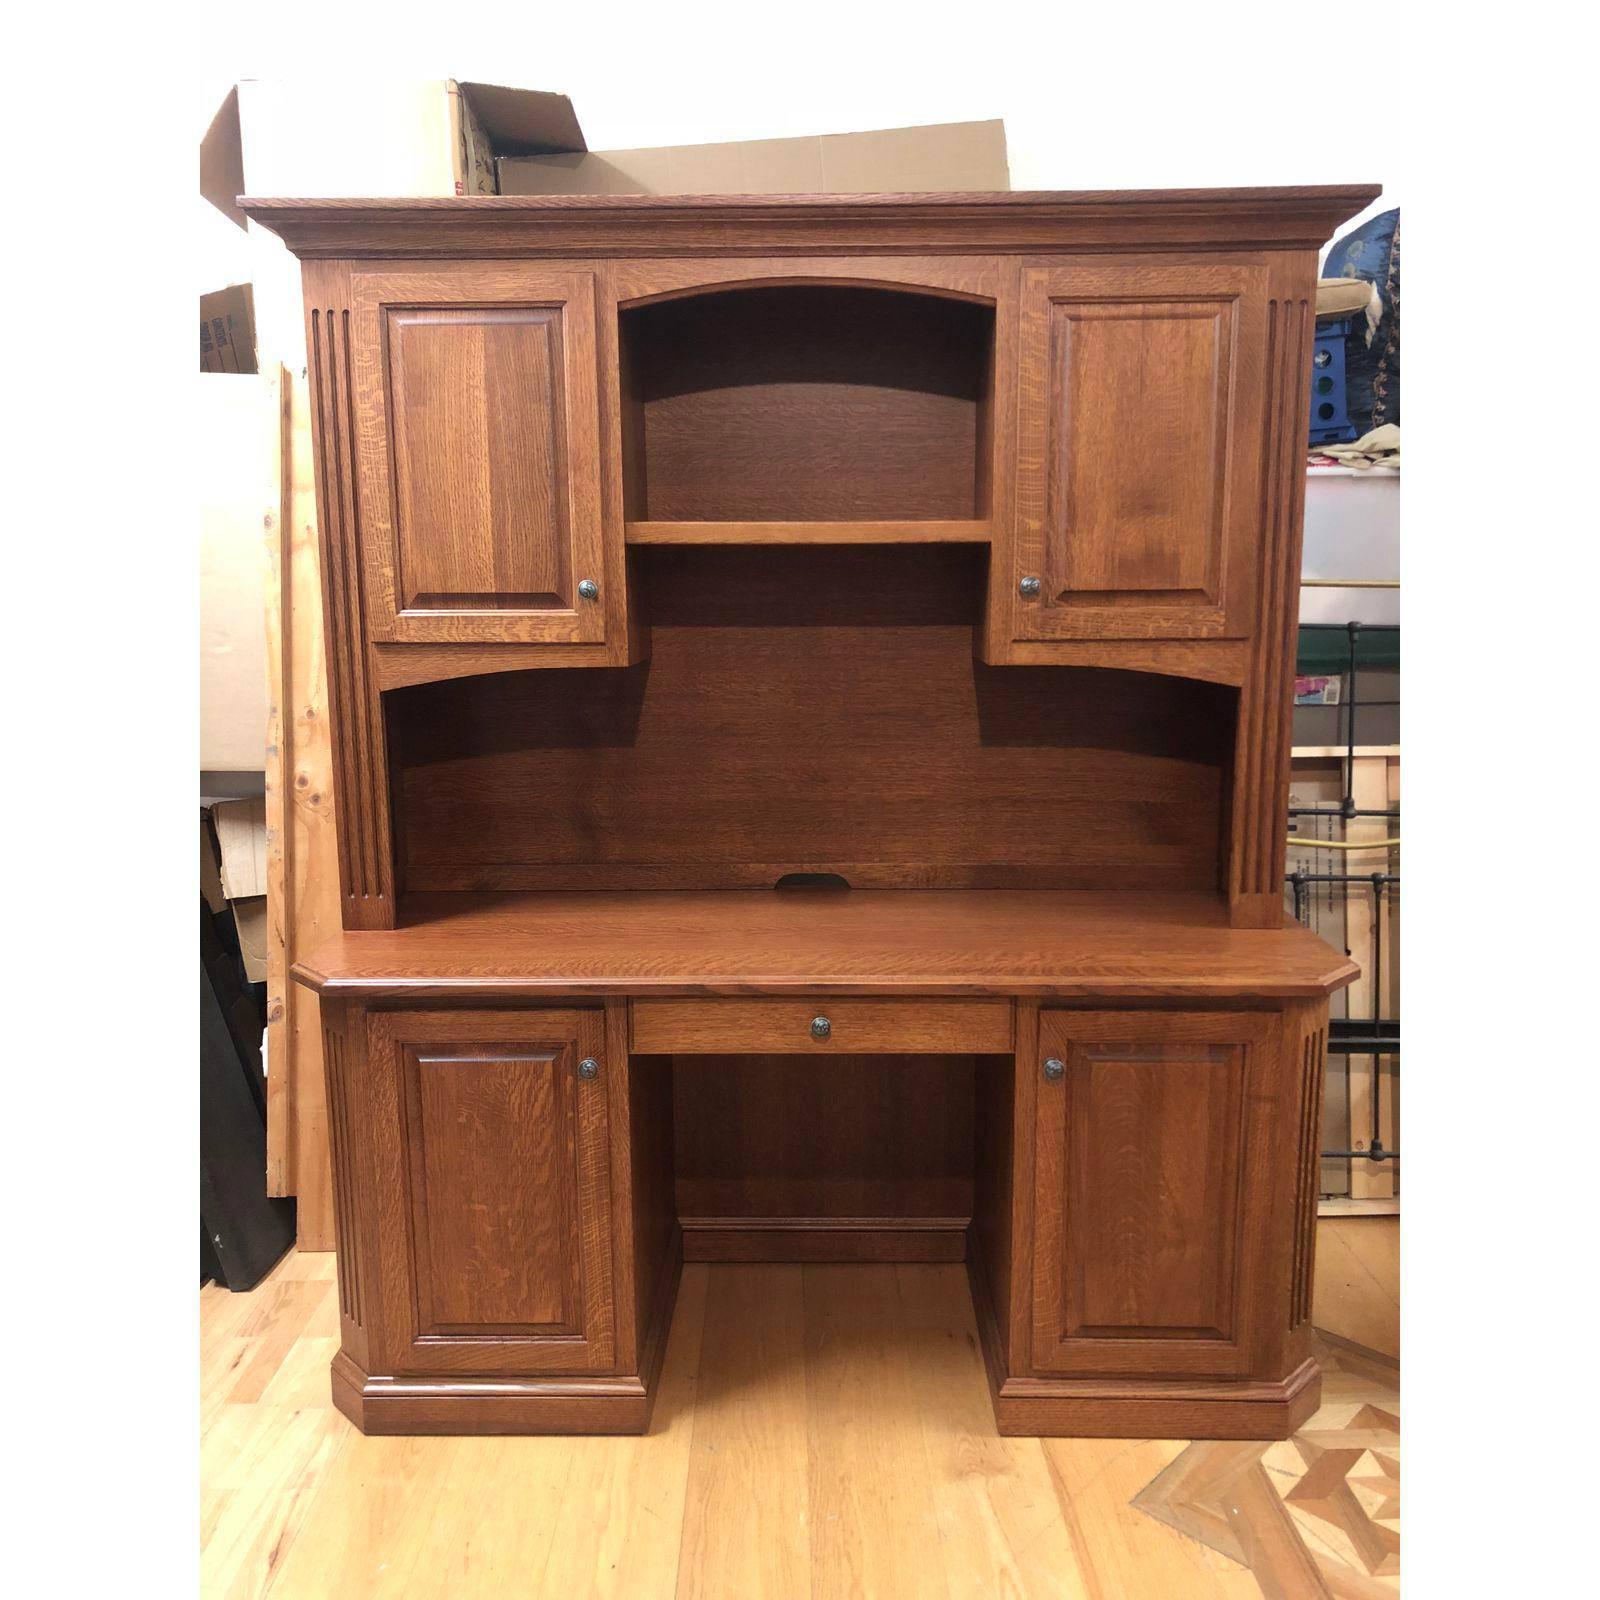 An Amish made, solid oak credenza with a solid oak hutch. The two pieces were constructed using quarter sawn oak. It was meticulously built with lots of subtle detailing which all add to its stately demeanor. This set offers ample storage for all